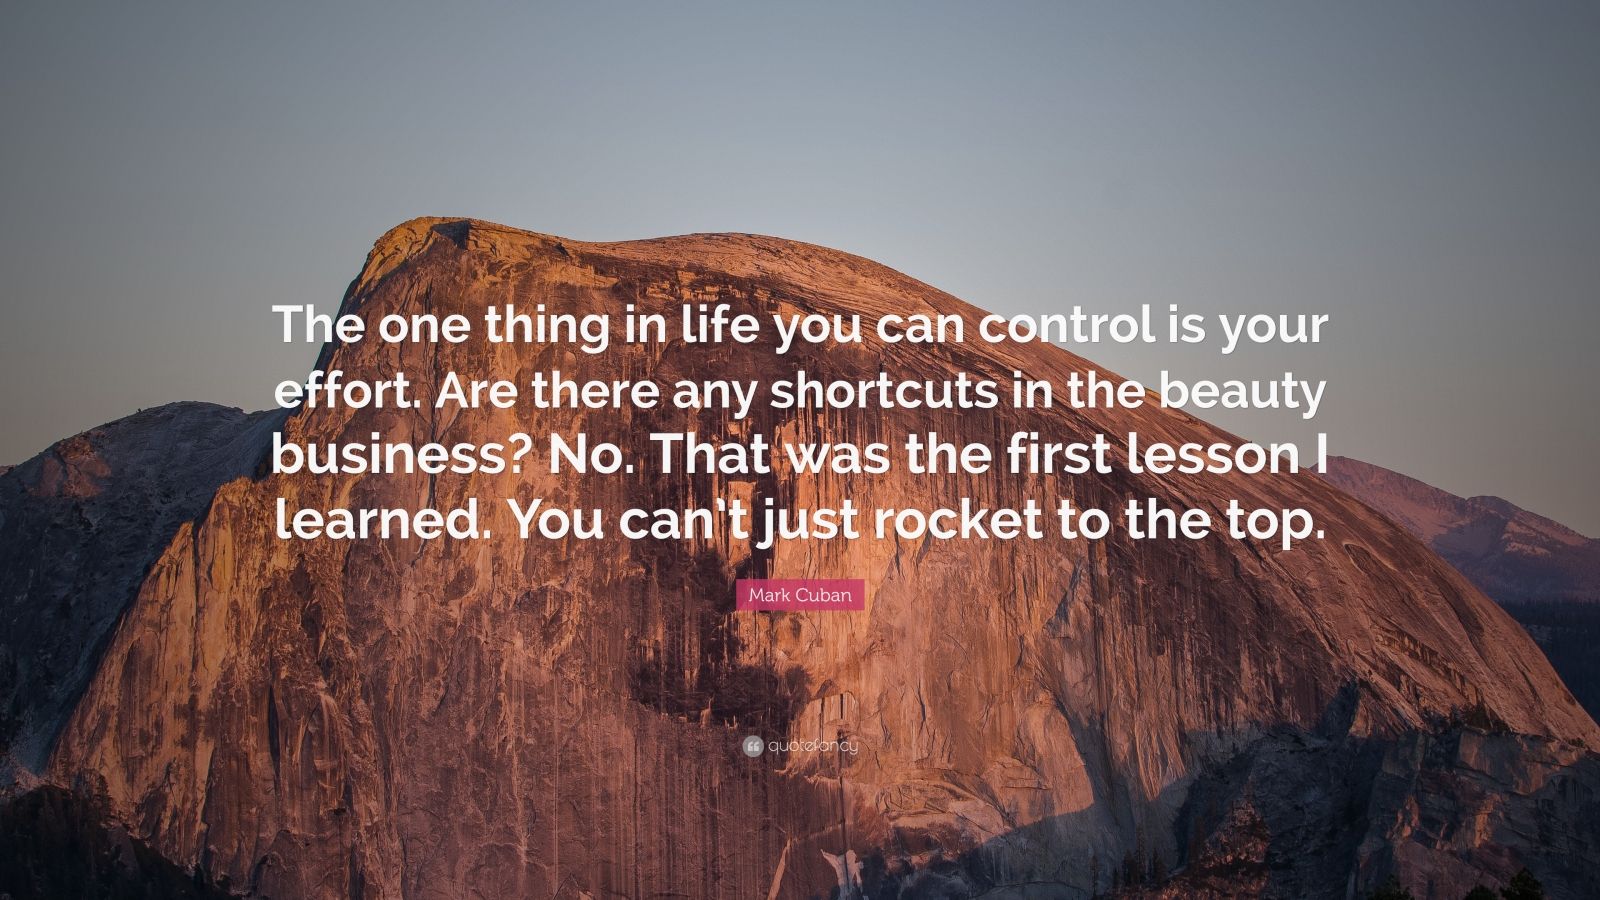 Mark Cuban Quote: "The one thing in life you can control is your effort. Are there any shortcuts ...